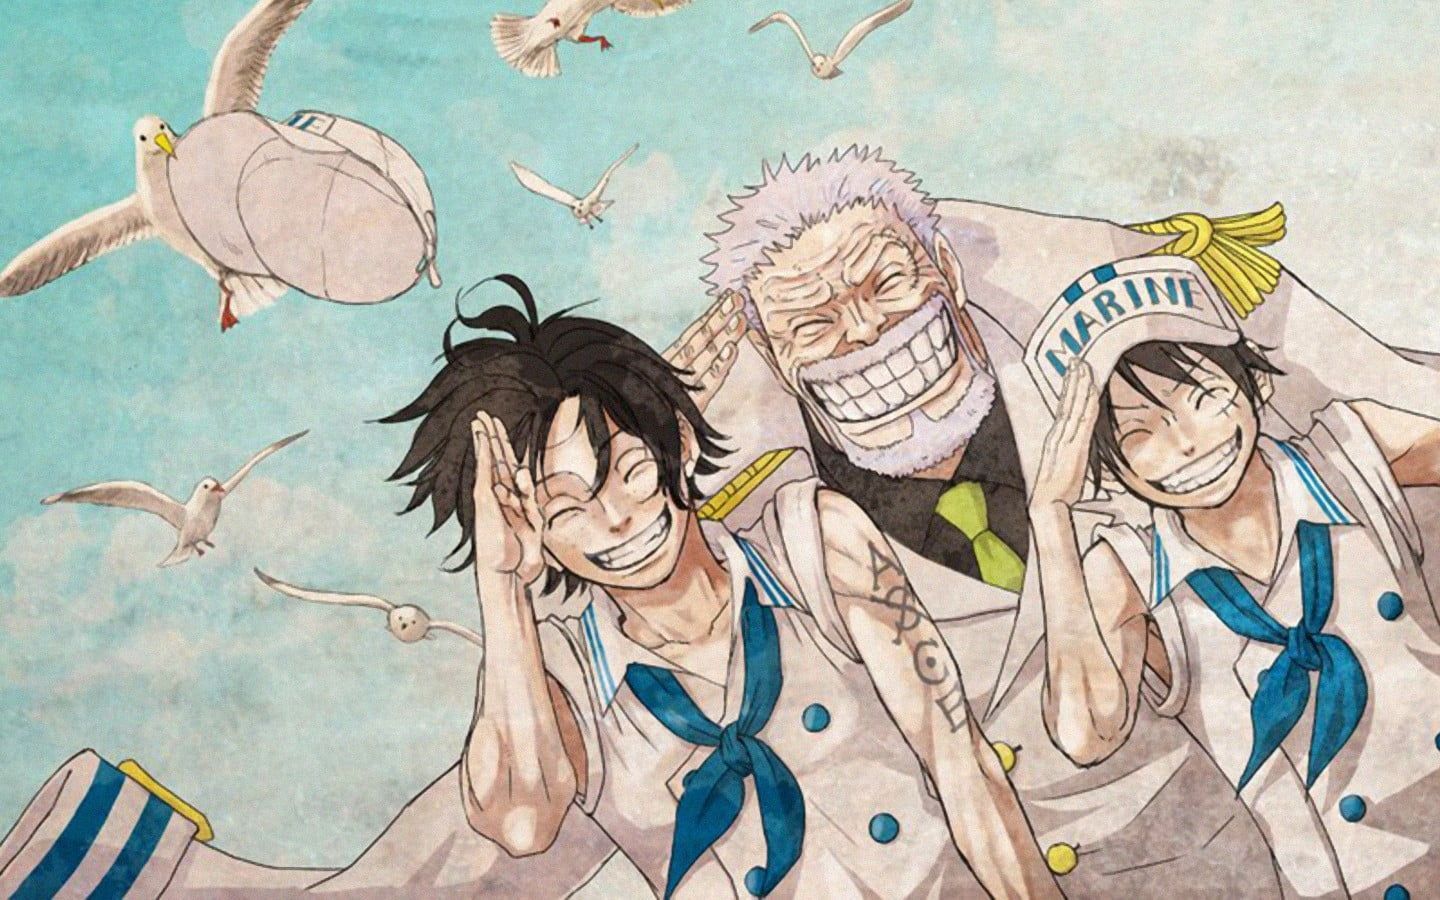 One Piece anime wallpaper #anime Monkey D. Luffy One Piece #marines Portgas D. Ace #seagulls Monkey D. Garp P. One piece anime, Ace and luffy, One piece ace